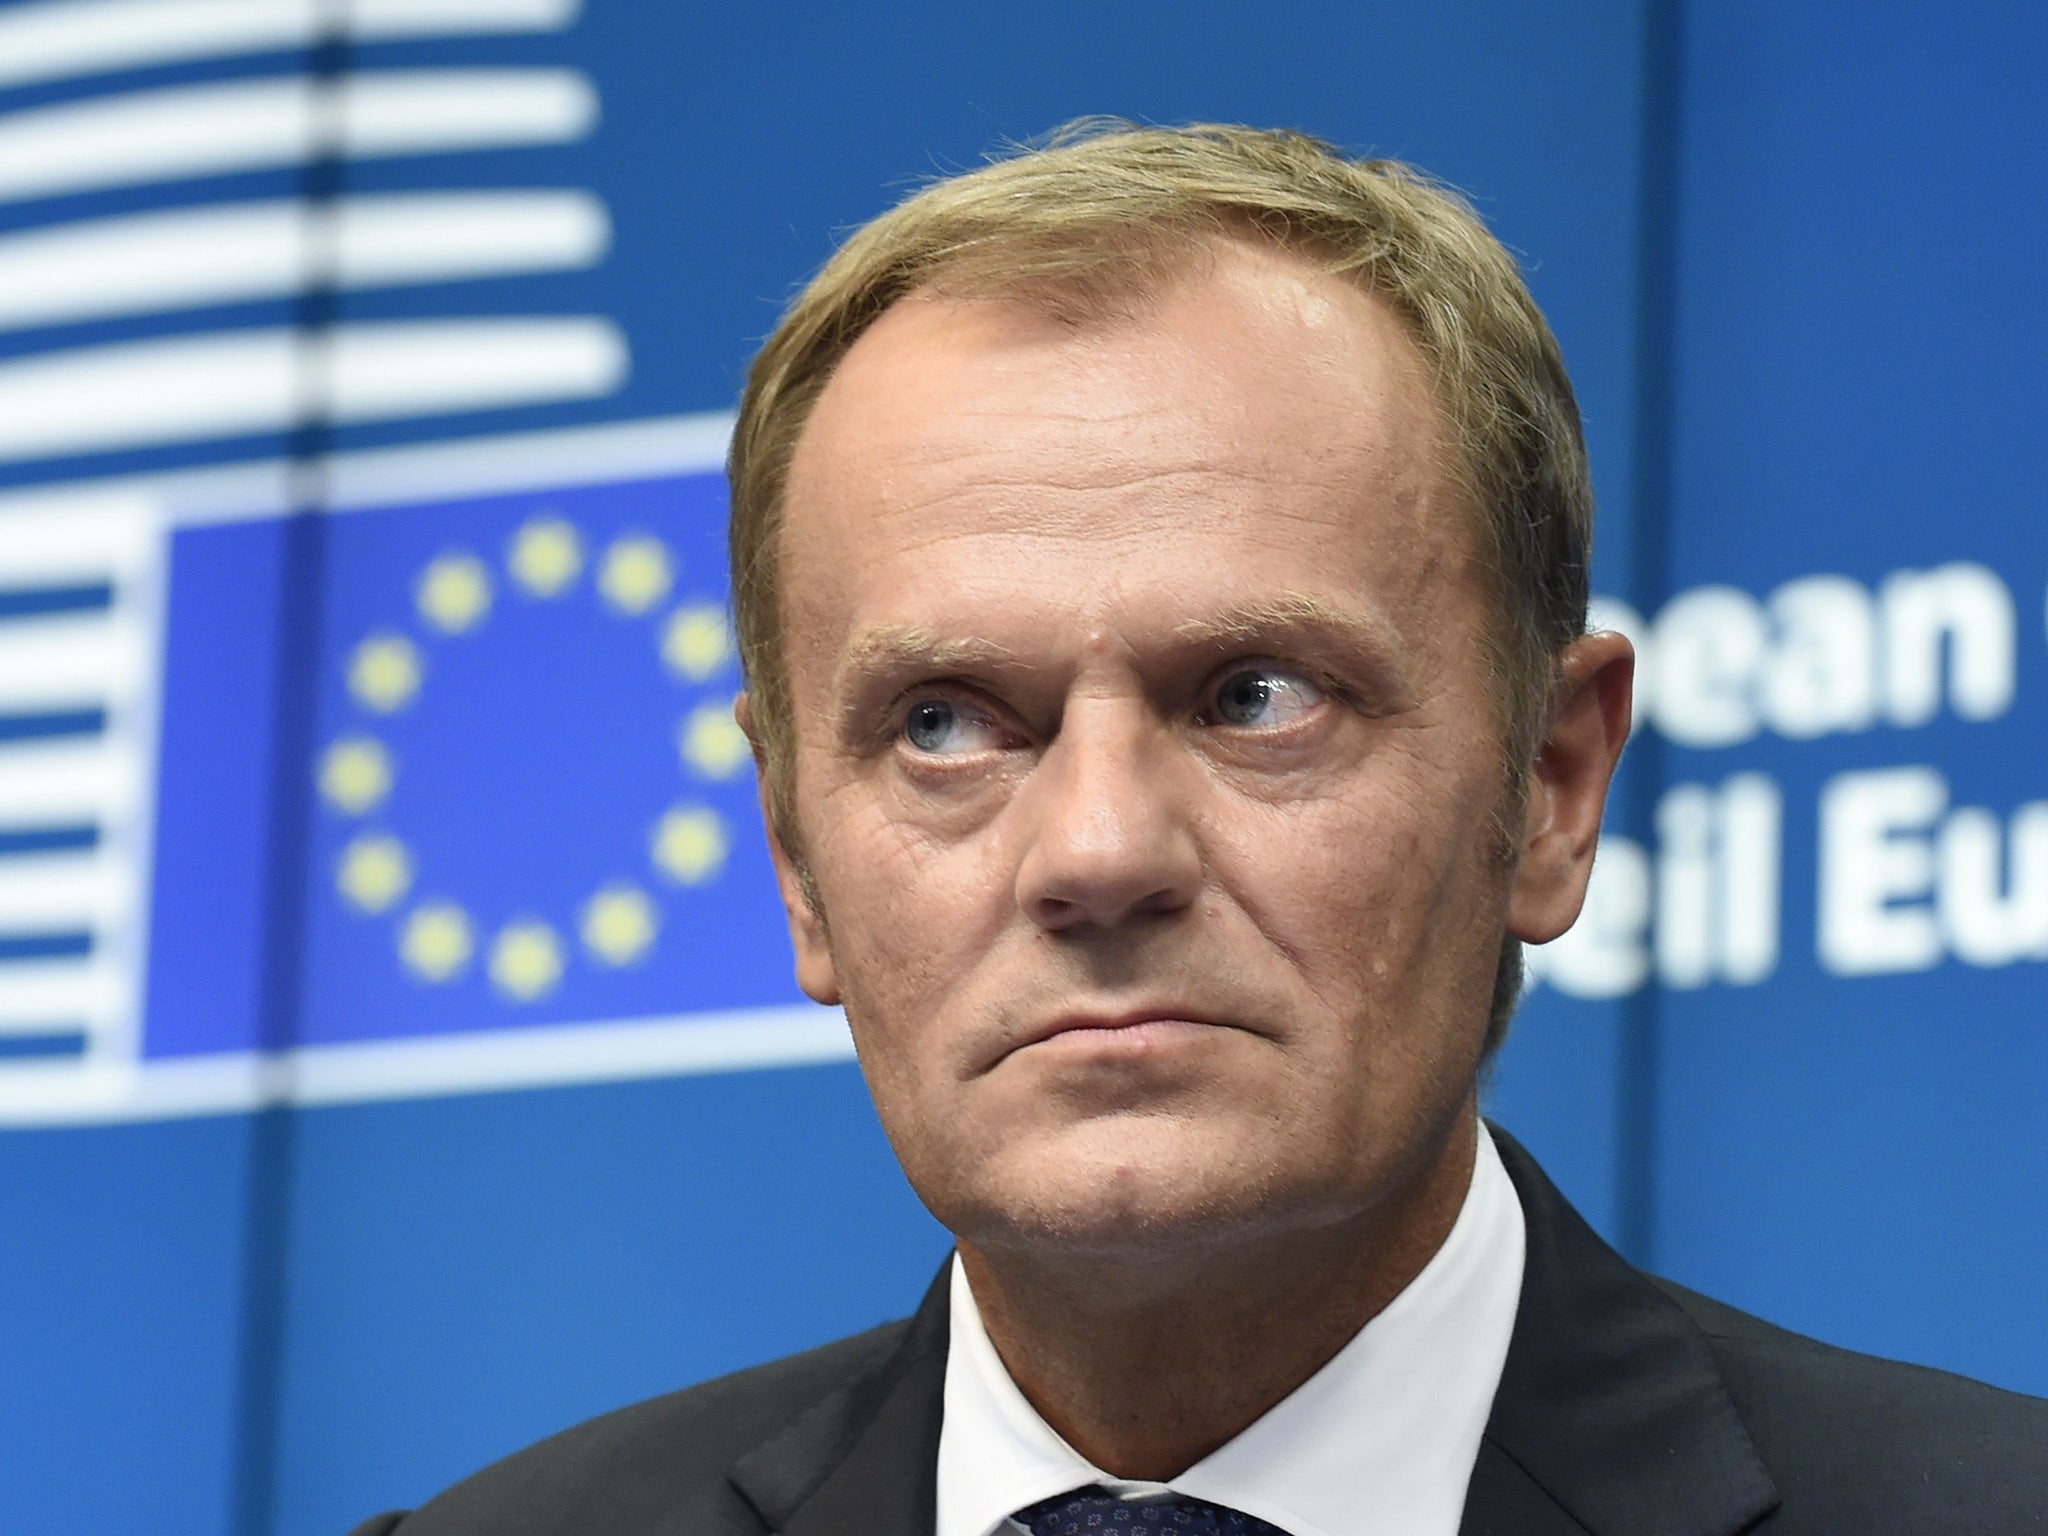 European Council President Donald Tusk added to US pressure to offer debt relief to Greece on Thursday.